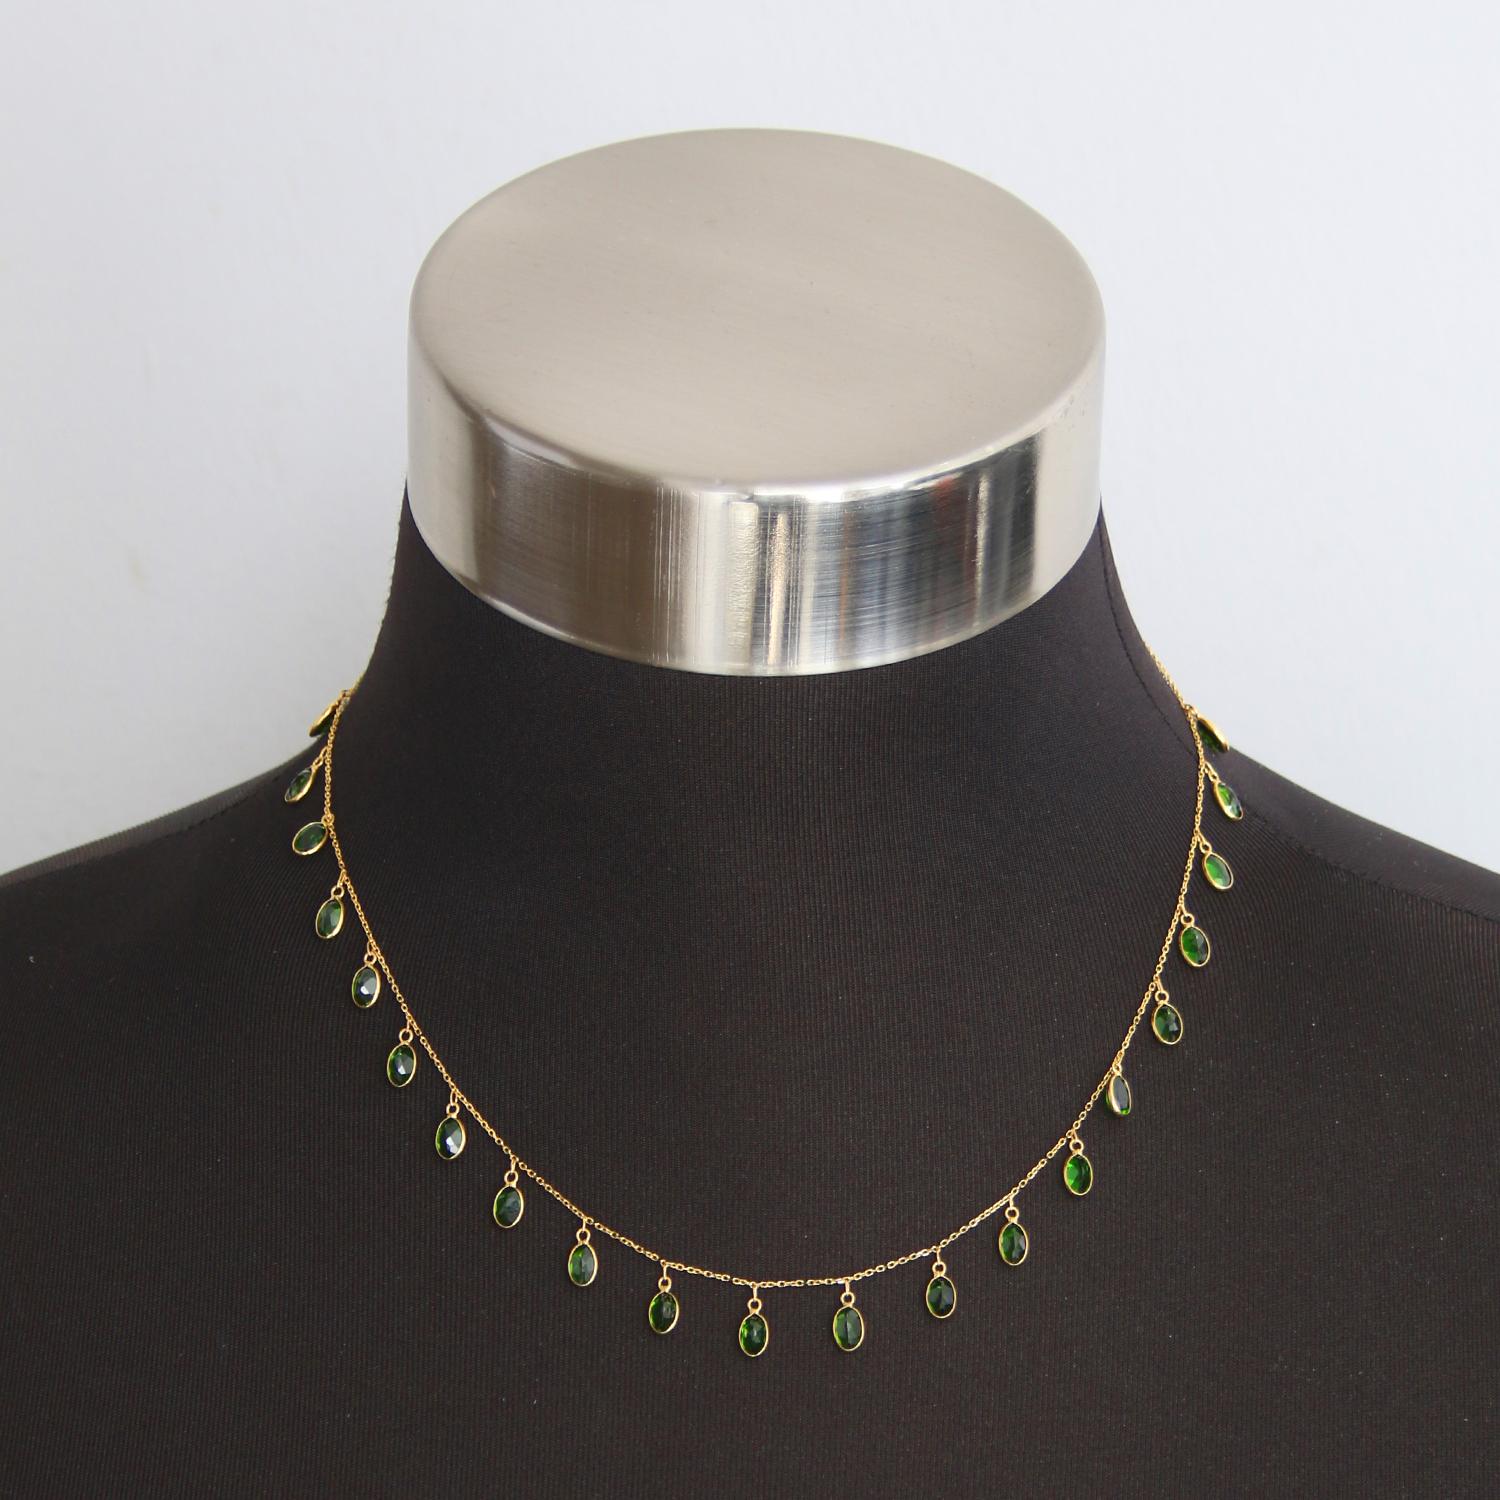 Diopside Stone and Yellow Gold Necklace - Oval cut Diopside dangle on an 18k yellow gold necklace measuring 17-18 inches long. Total sapphire weight is approx. 6.85. New with DeMesy box.